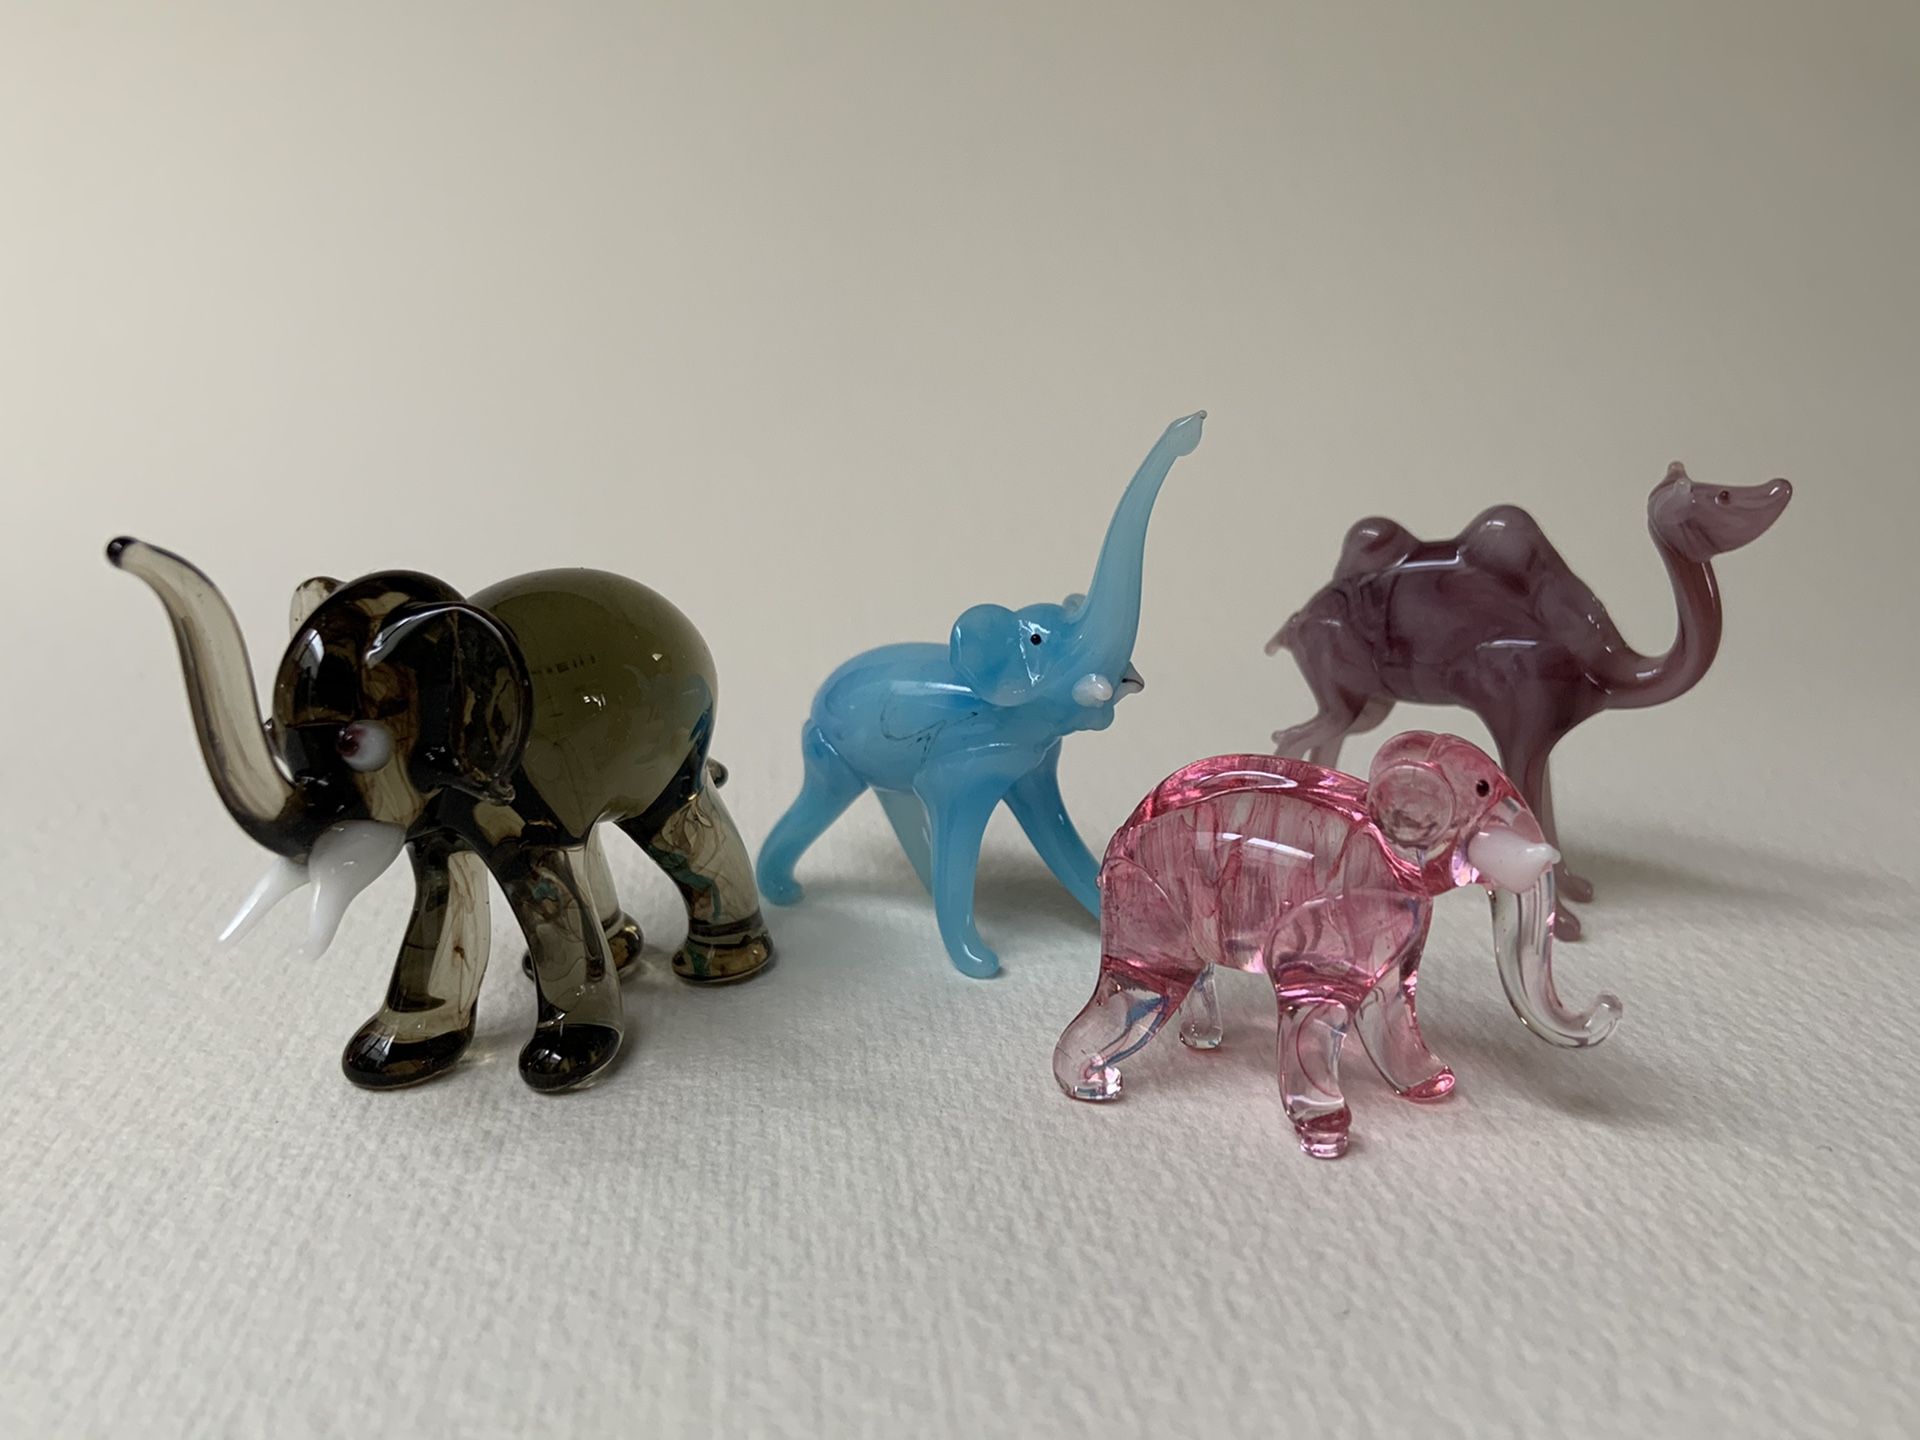 Collectible Glass Figurines Elephants and Camel